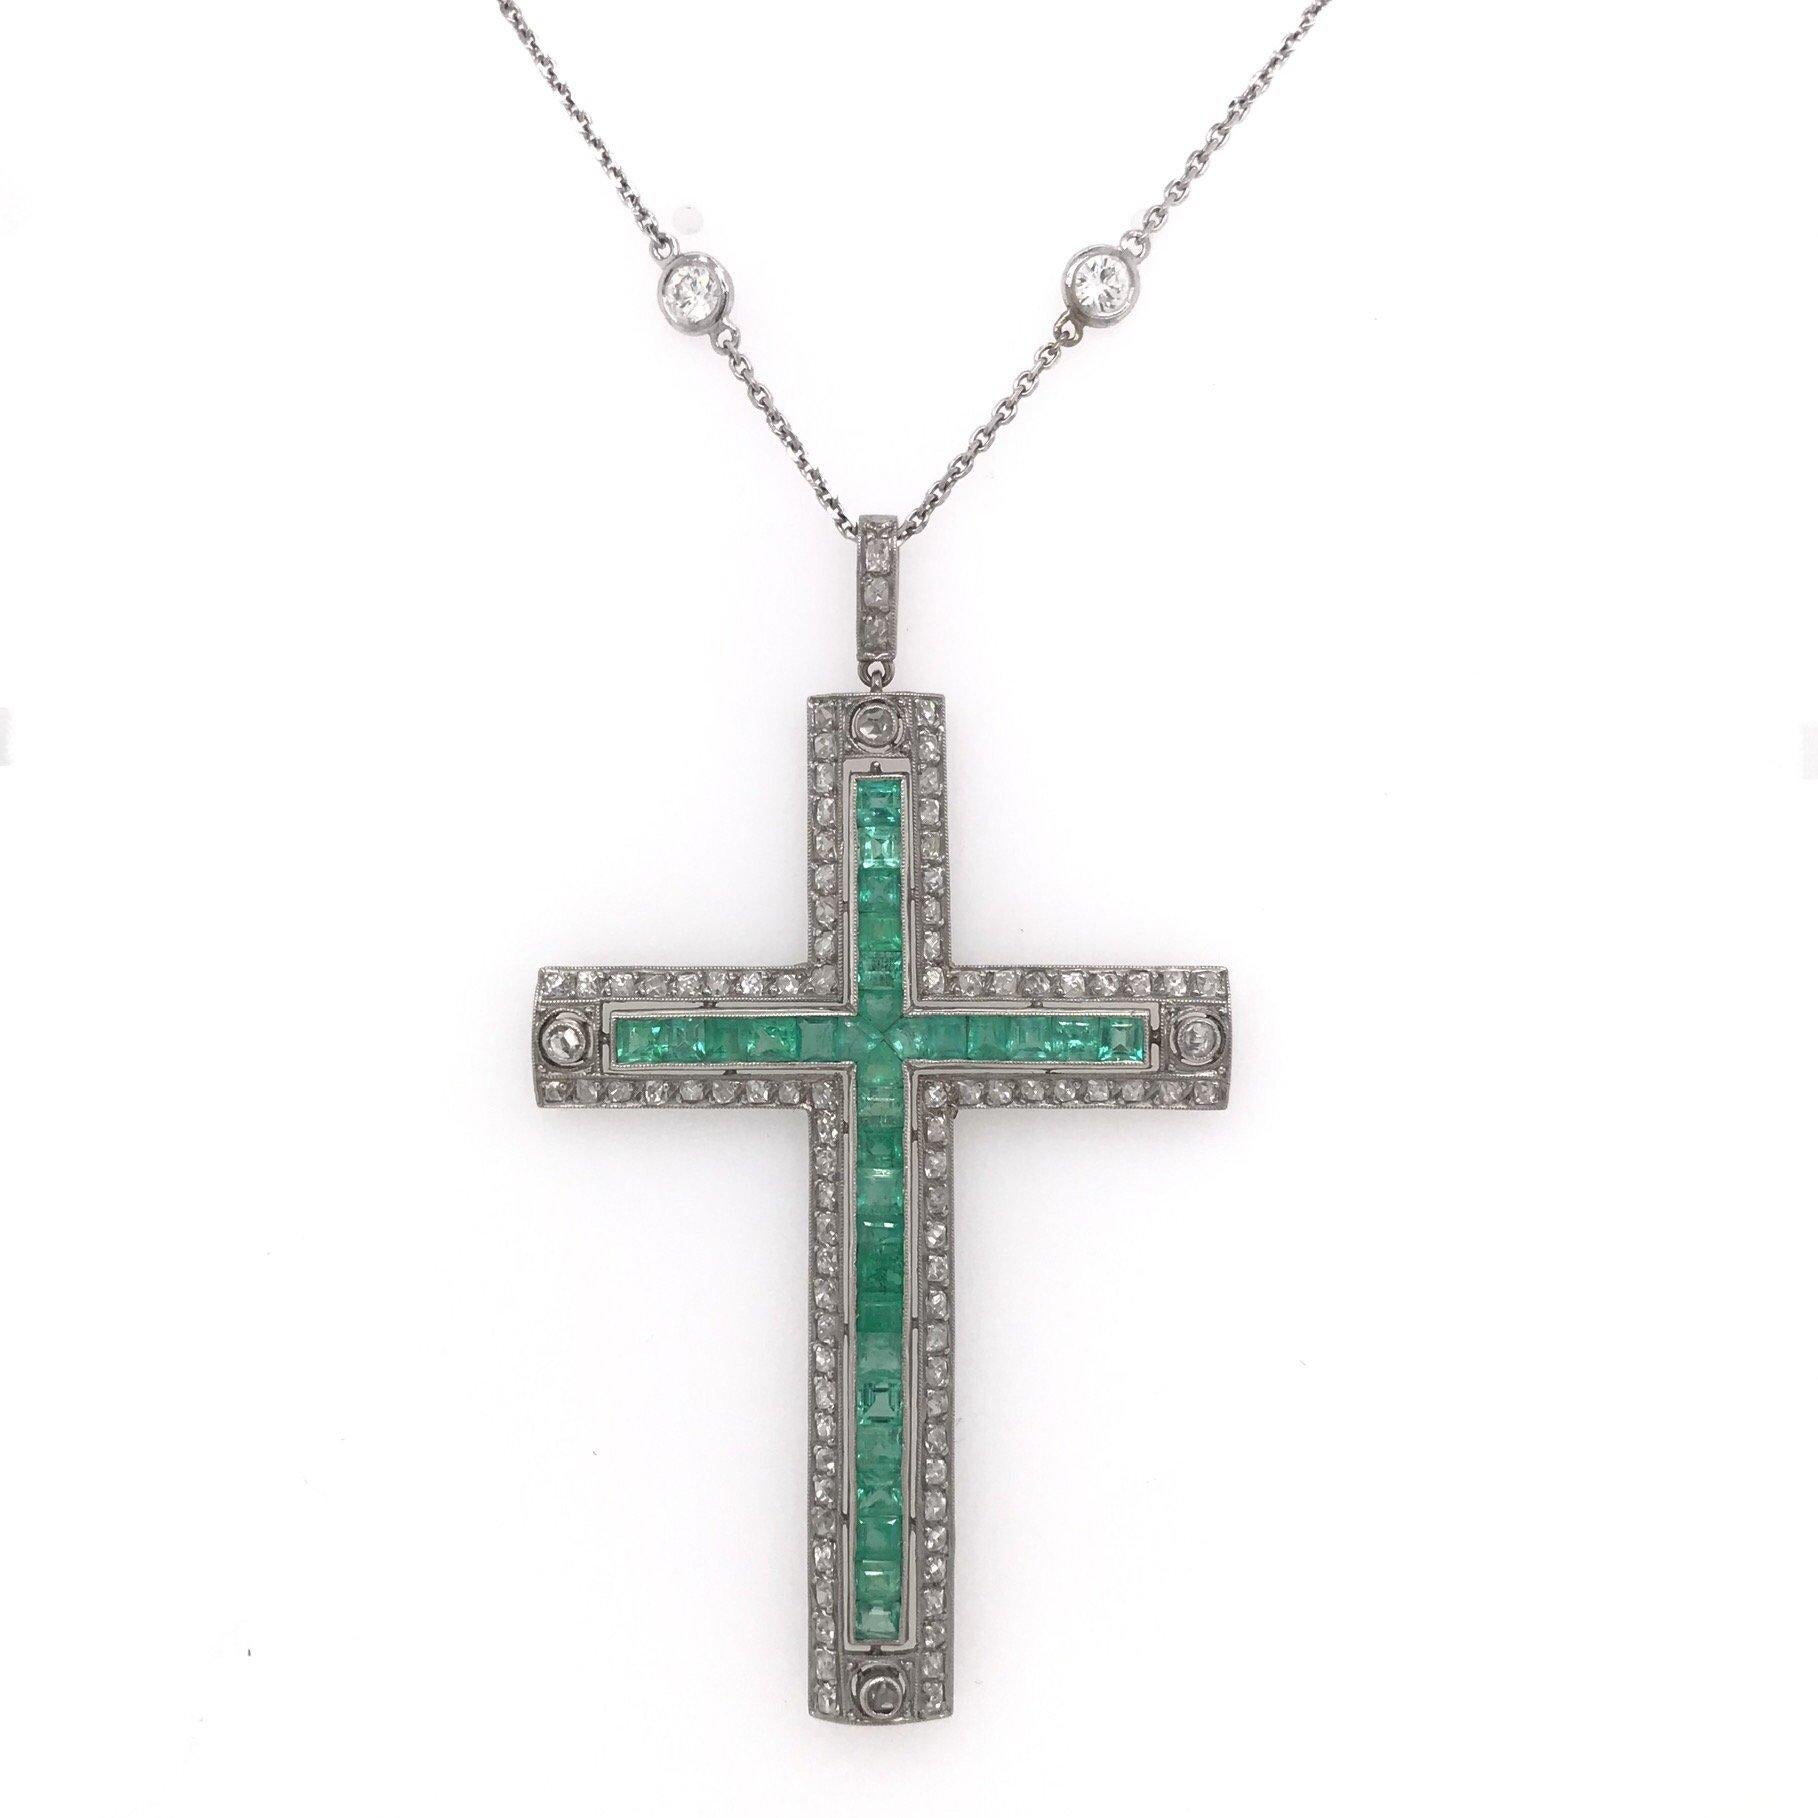 This cross pendant is an antique piece, handcrafted sometime during the Art Deco design period ( 1920-1940 ). This incredibly decadent antique cross features 1 carat of old mine cut diamonds and 2.50 carats of vibrant emeralds. This diamond and